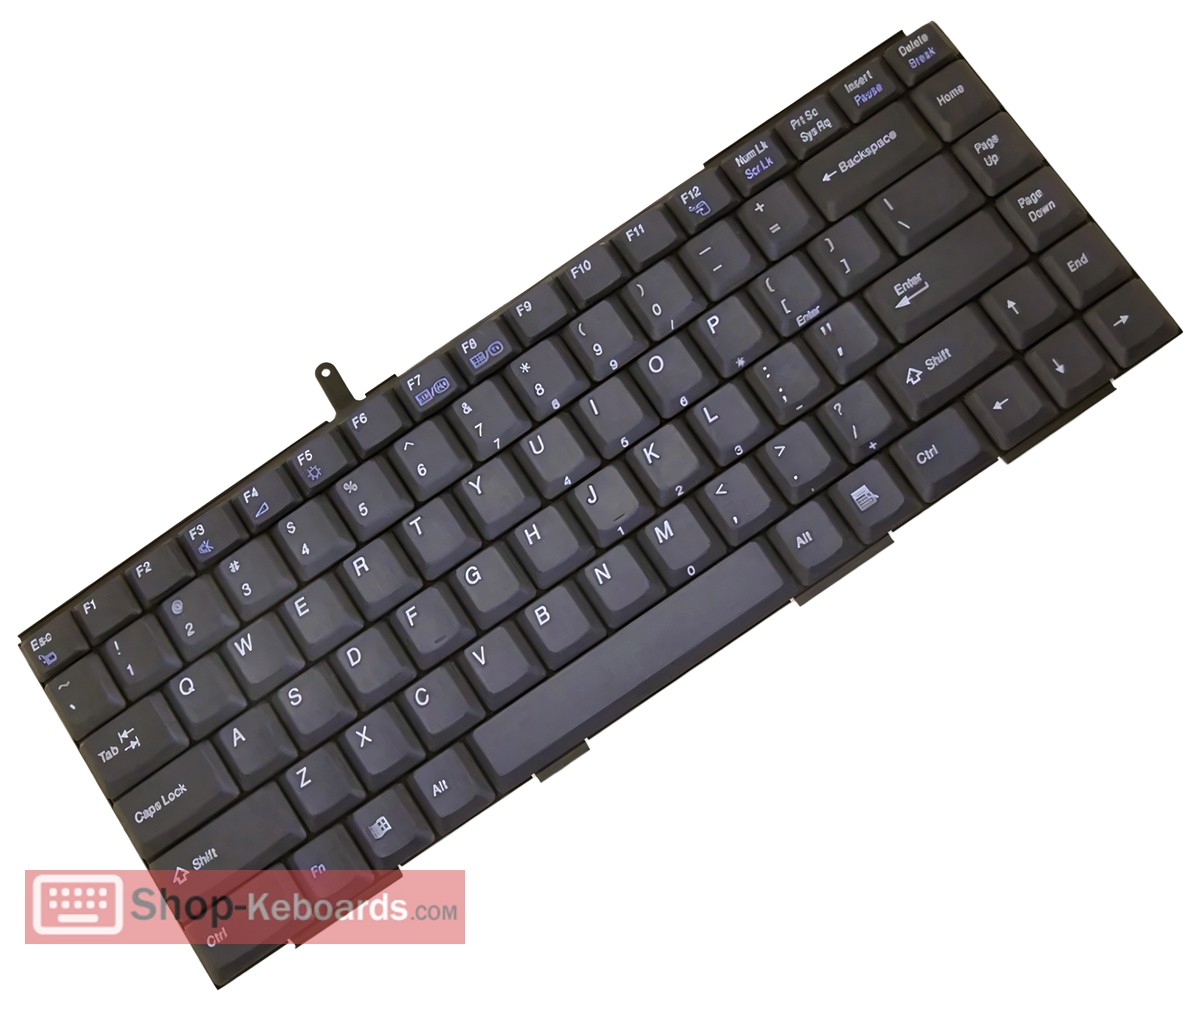 Sony VAIO PCG-F580K Keyboard replacement